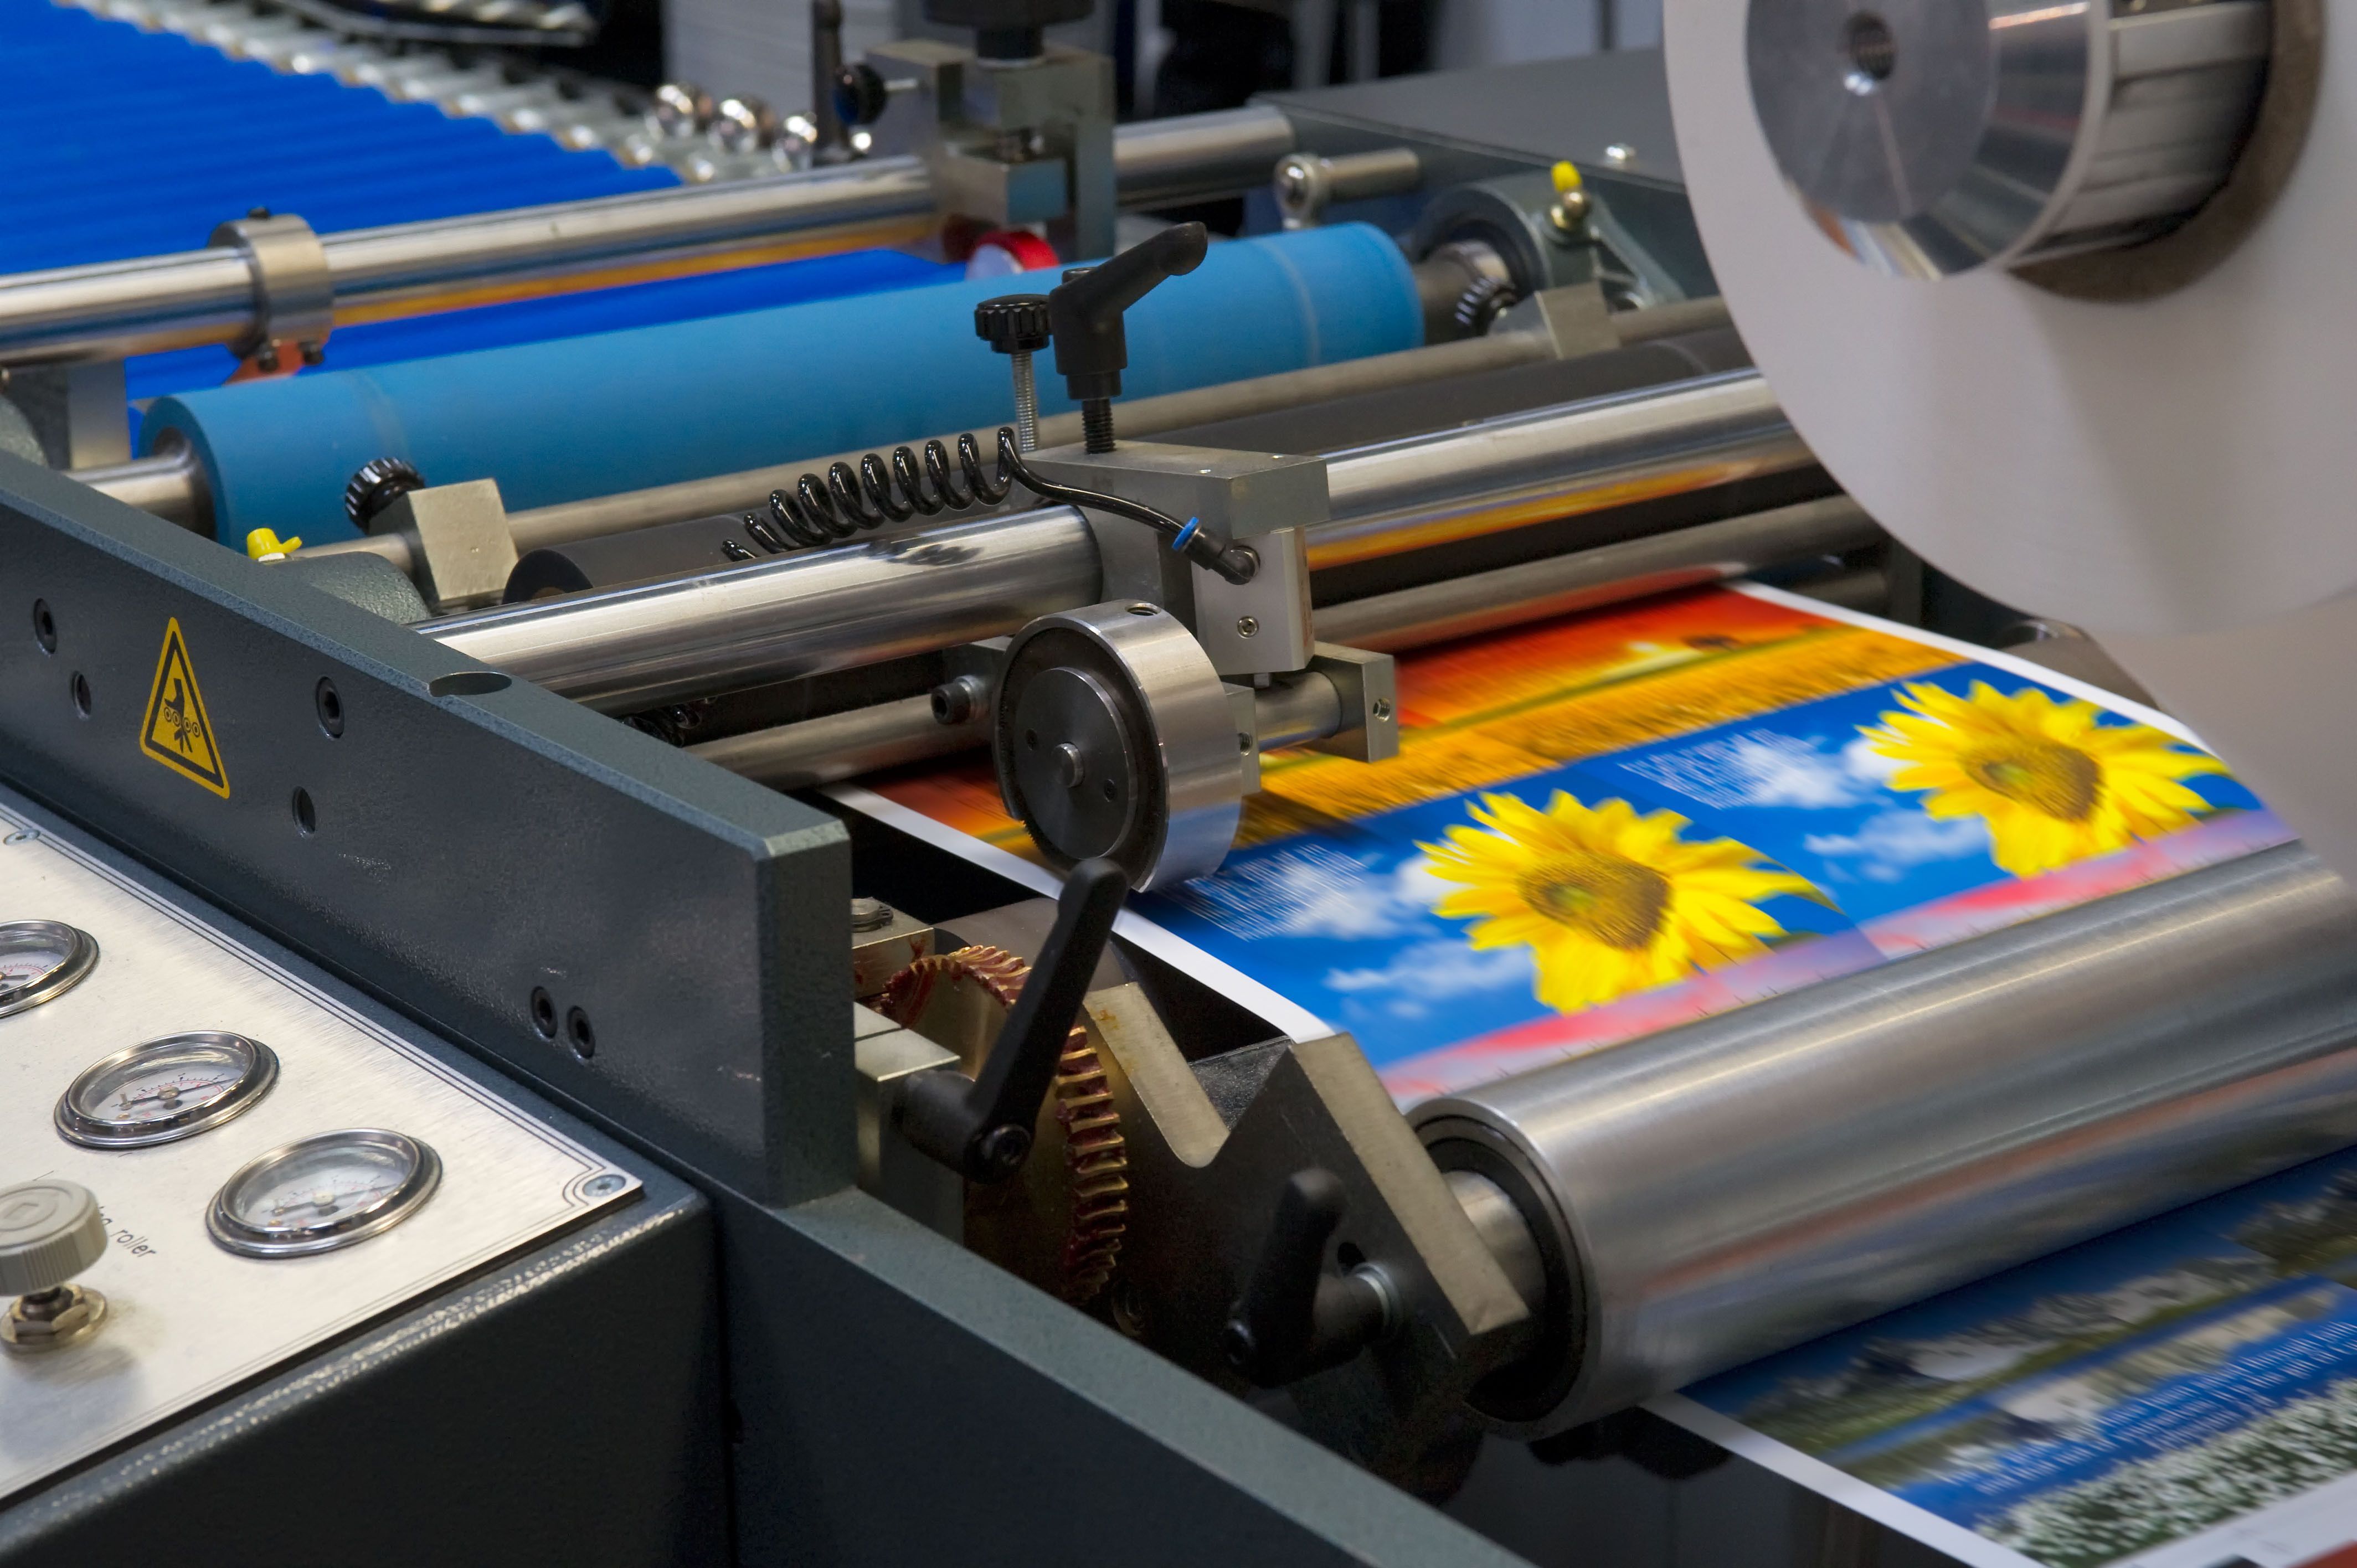 7 Reasons to Outsource Your Printing Needs